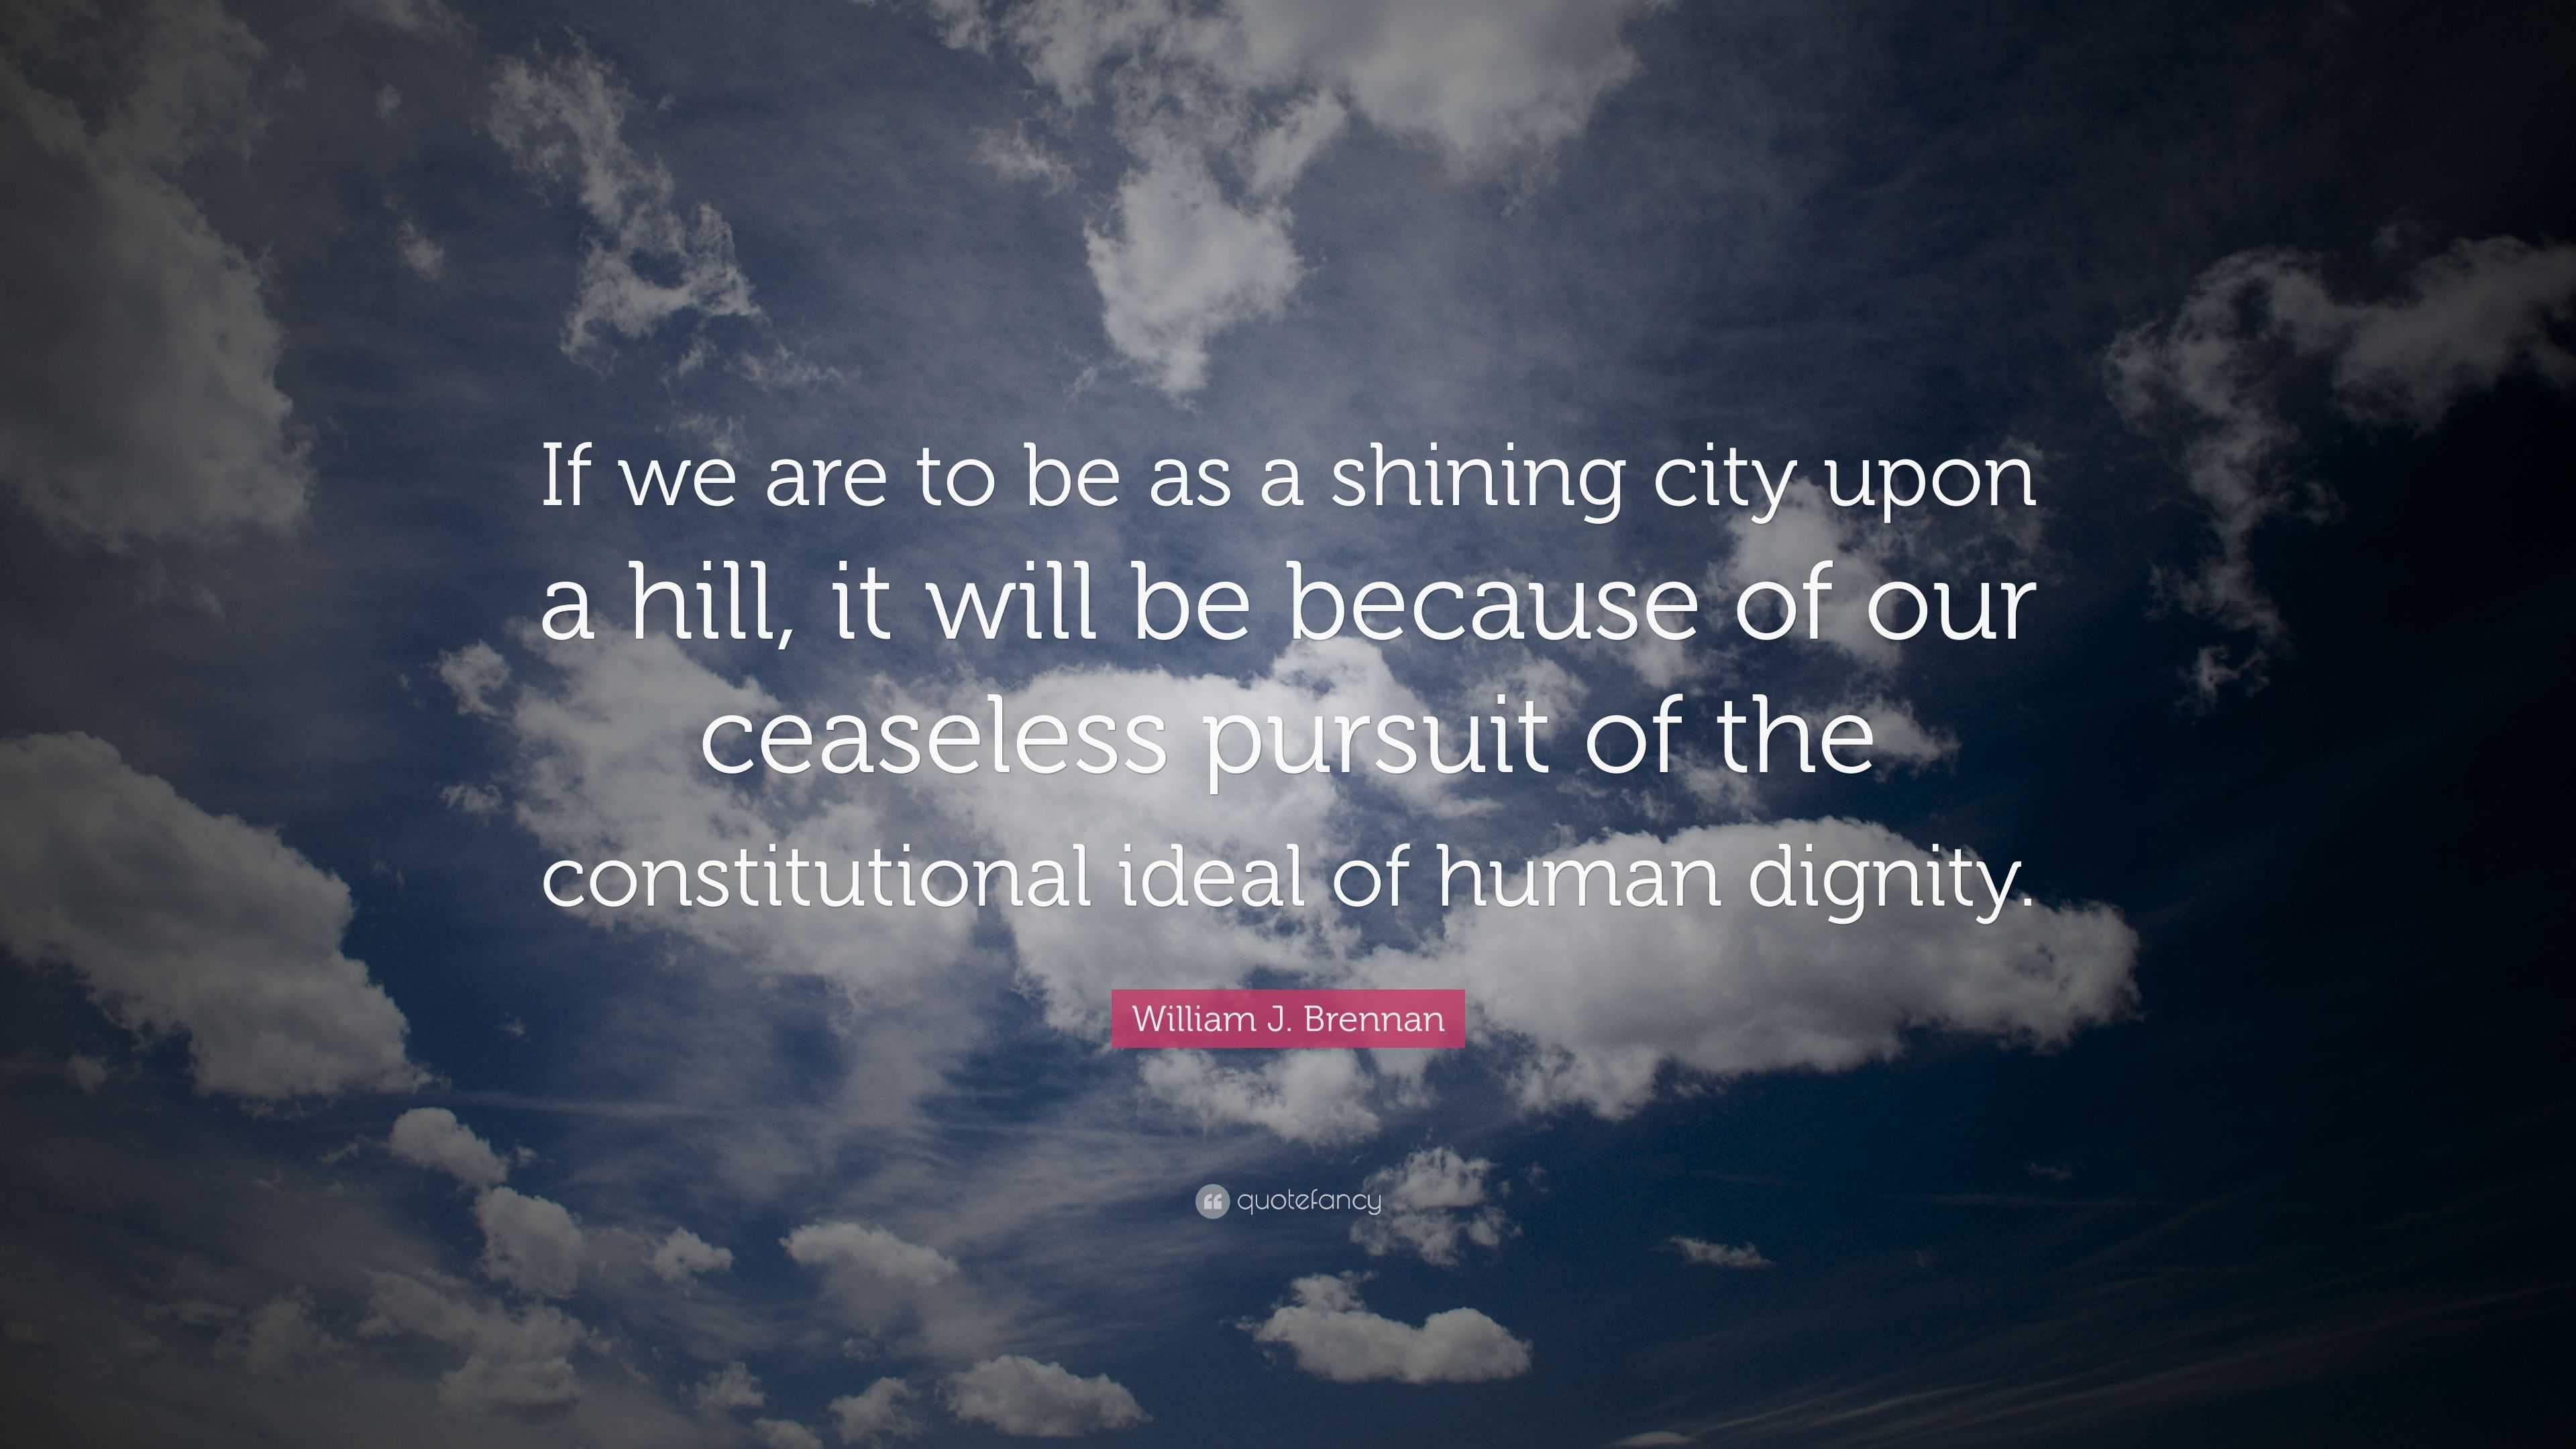 William J Brennan Quote “if We Are To Be As A Shining City Upon A Hill It Will Be Because Of 8852